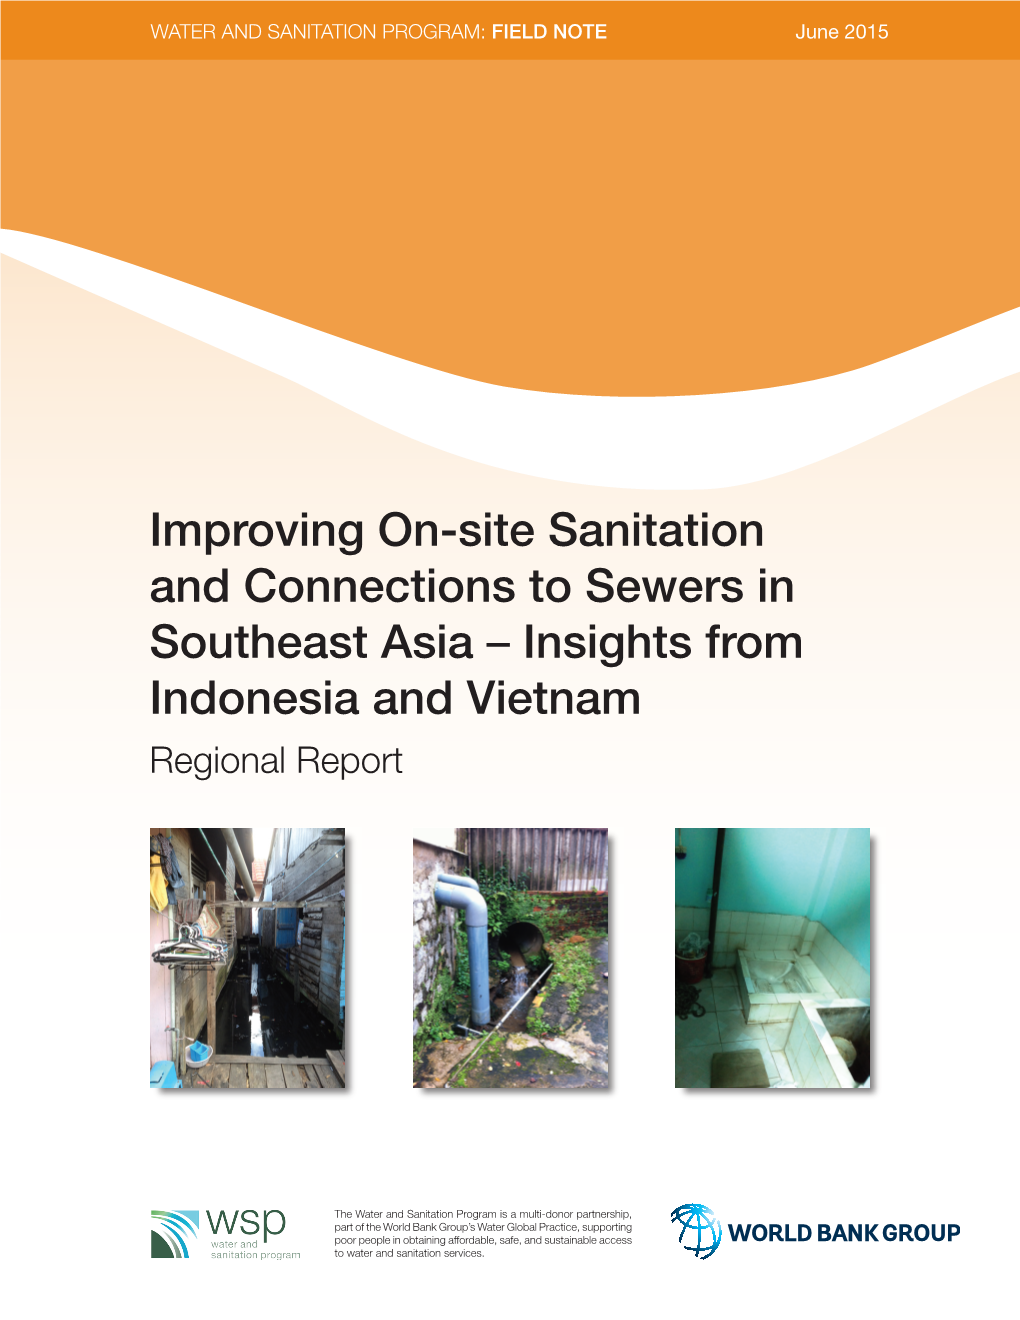 Improving On-Site Sanitation and Connections to Sewers in Southeast Asia – Insights from Indonesia and Vietnam Regional Report